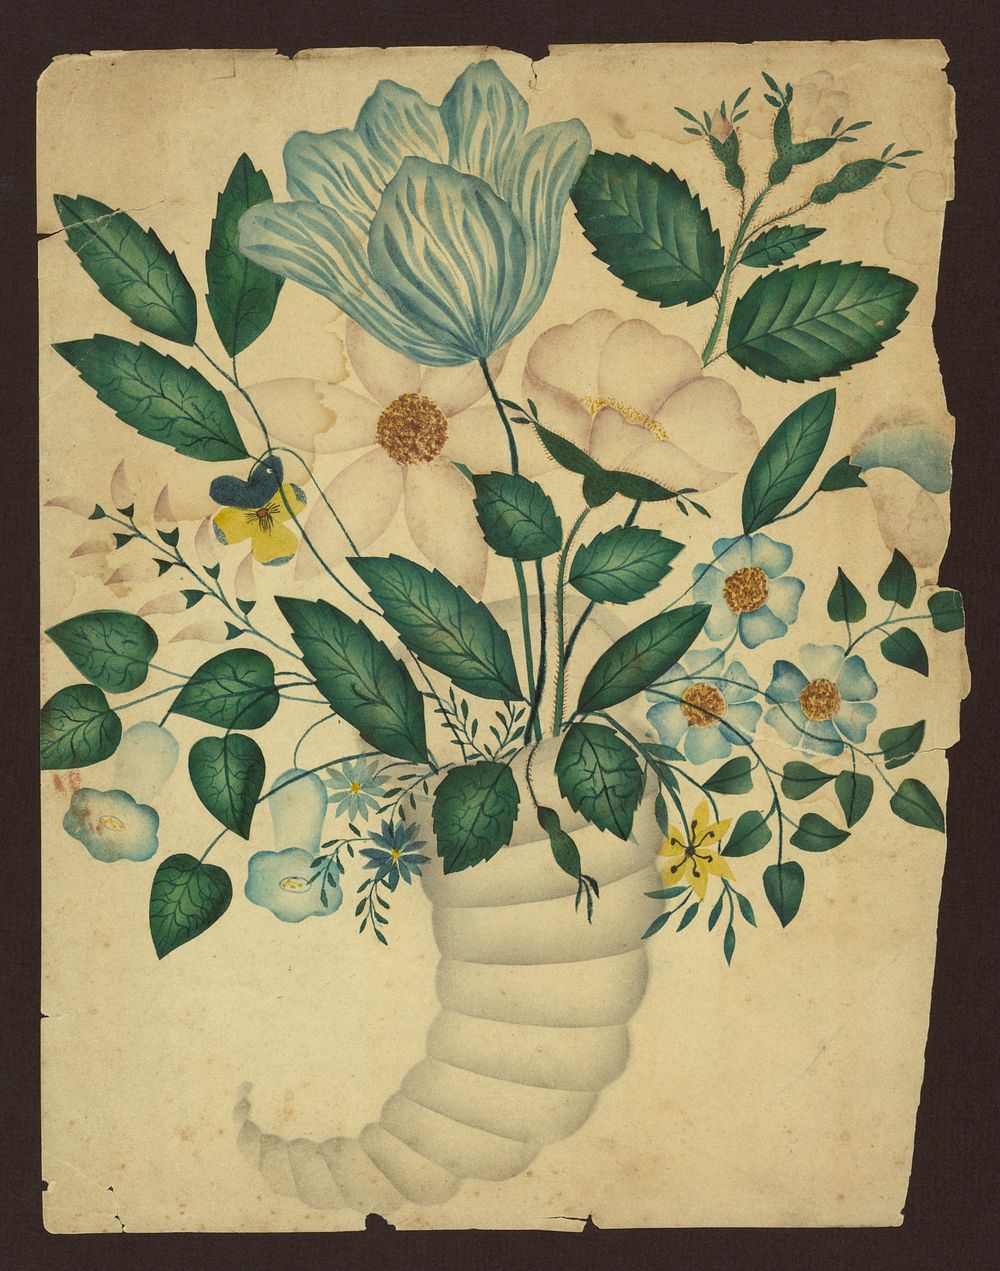 Cornucopia of flowers (1820). Original from the Library of Congress.